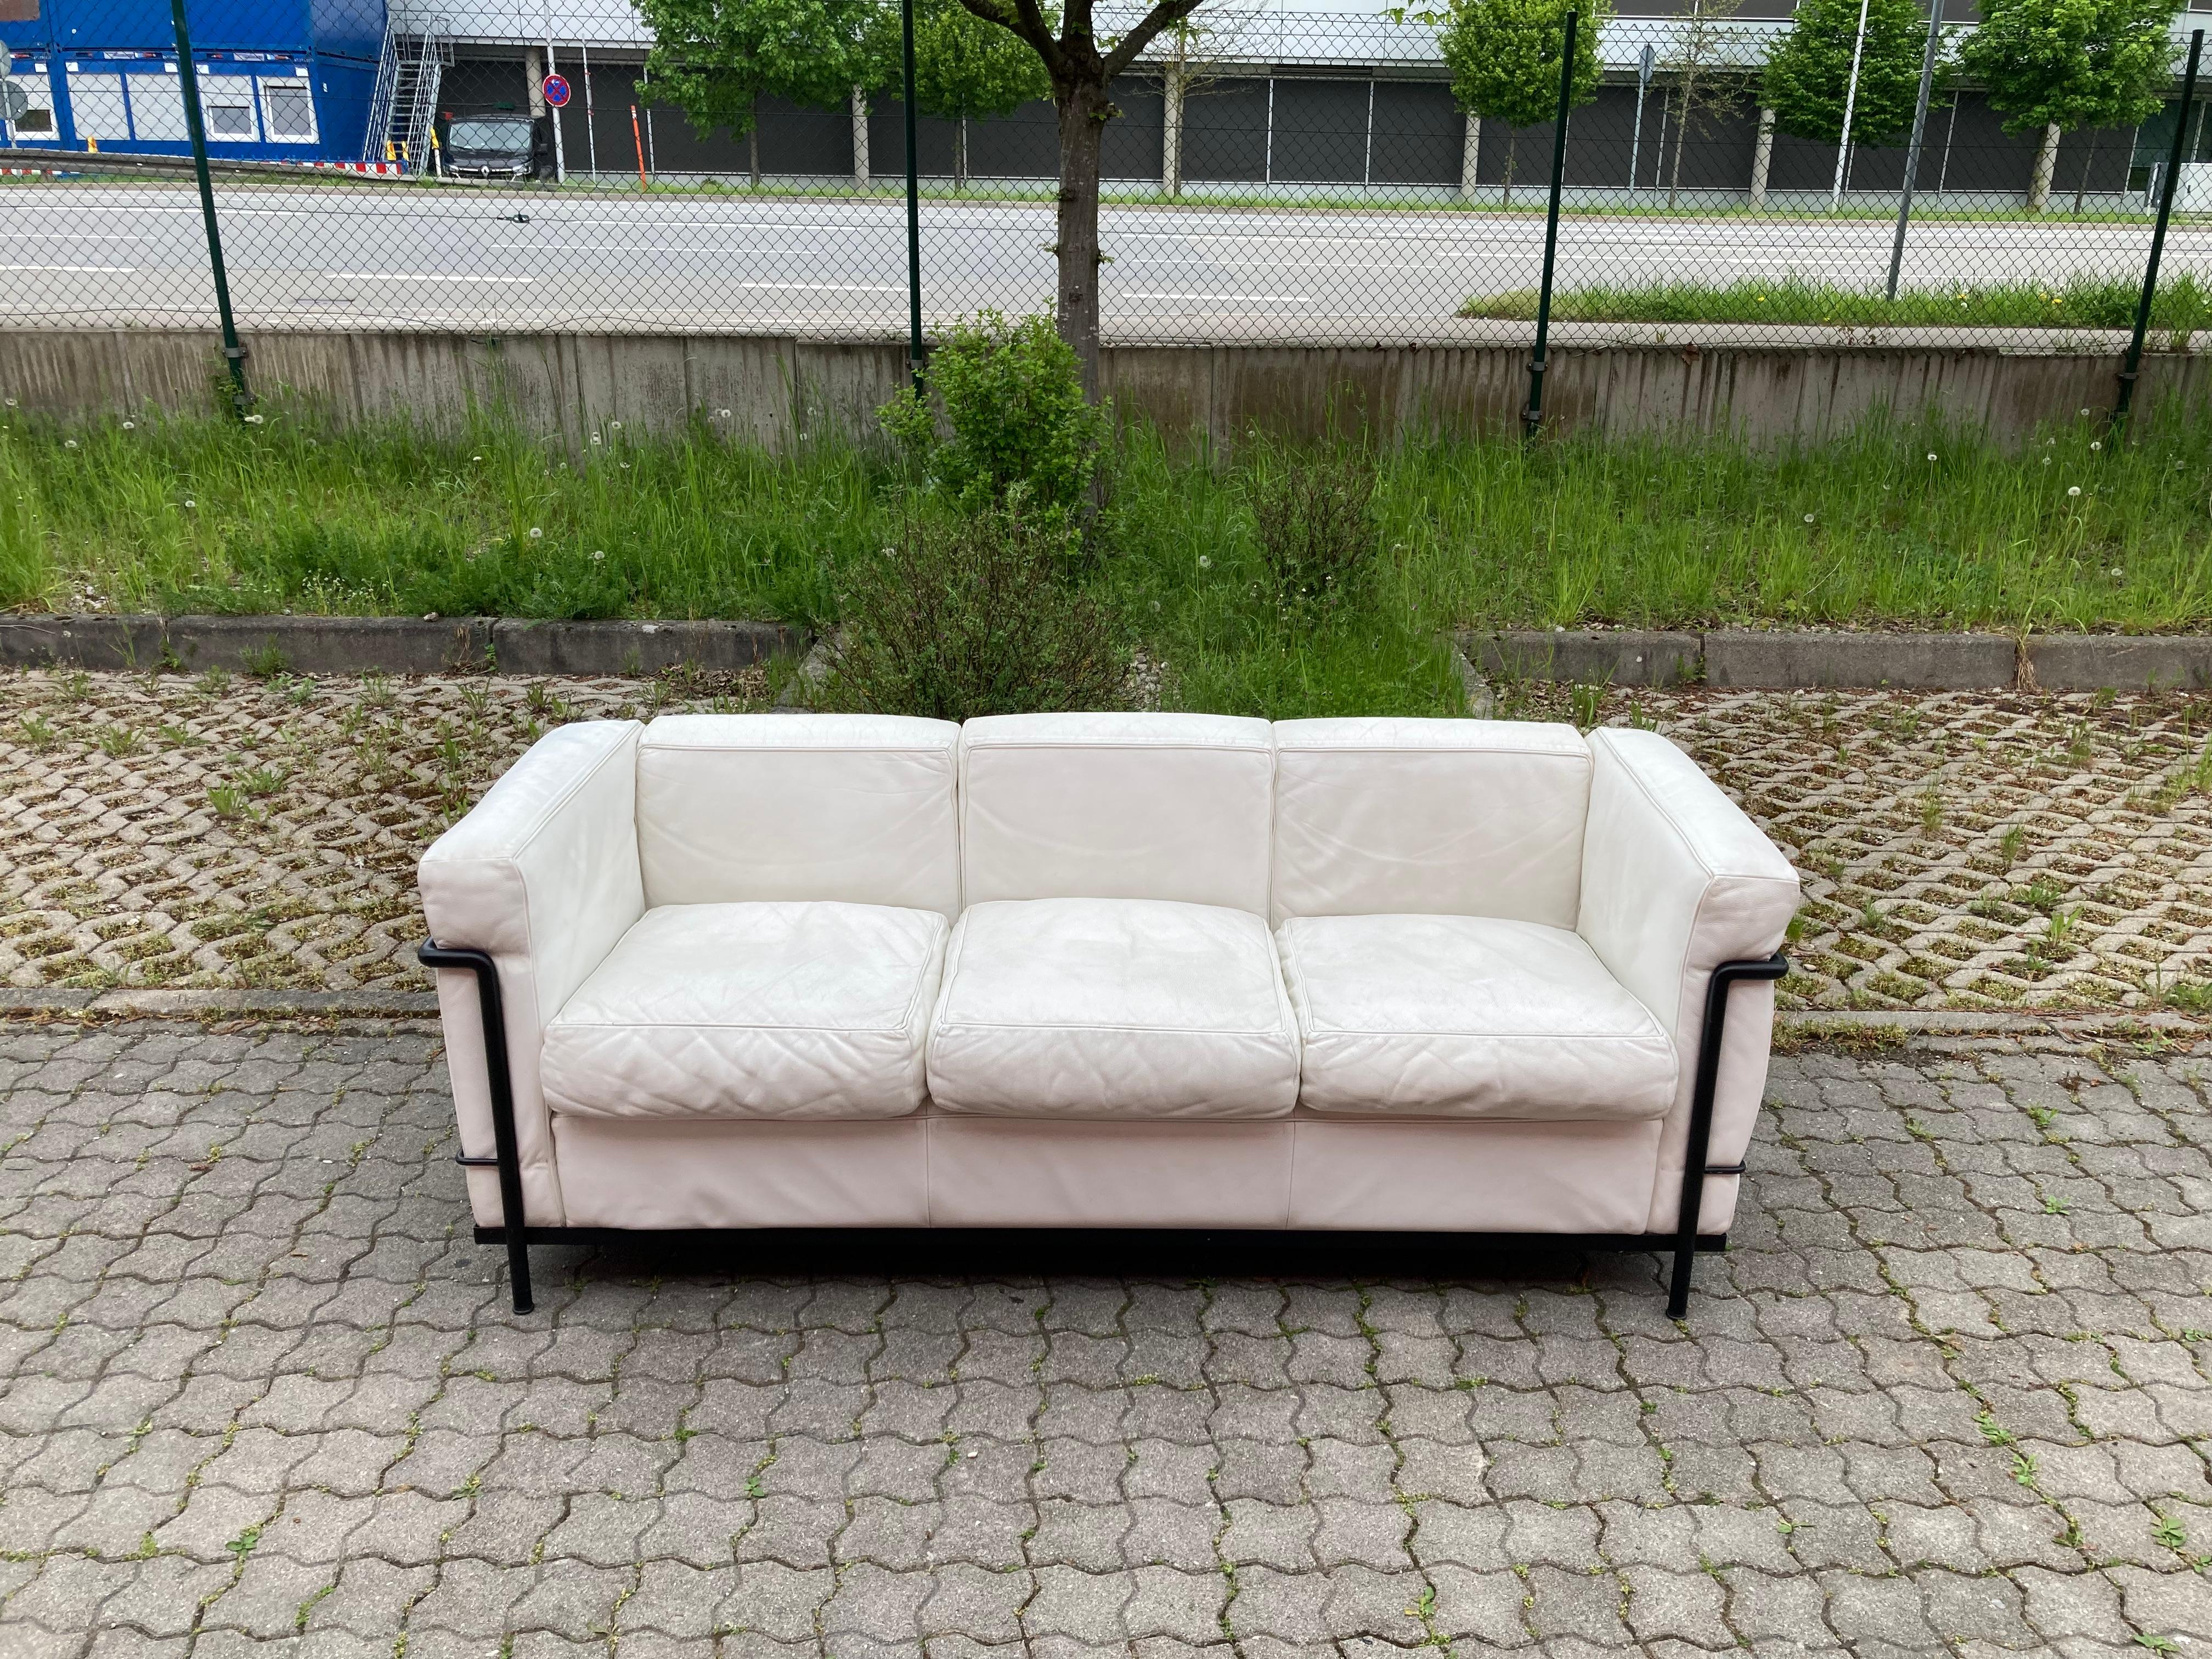 This LC2 three-seat sofa in white leather was designed by Le Corbusier and produced by Cassina.
It features a black colored tubular steel frame. 
The leather has some patina.
Some marks on the tubular frame.
A Classic Iconic Sofa in a beautiful